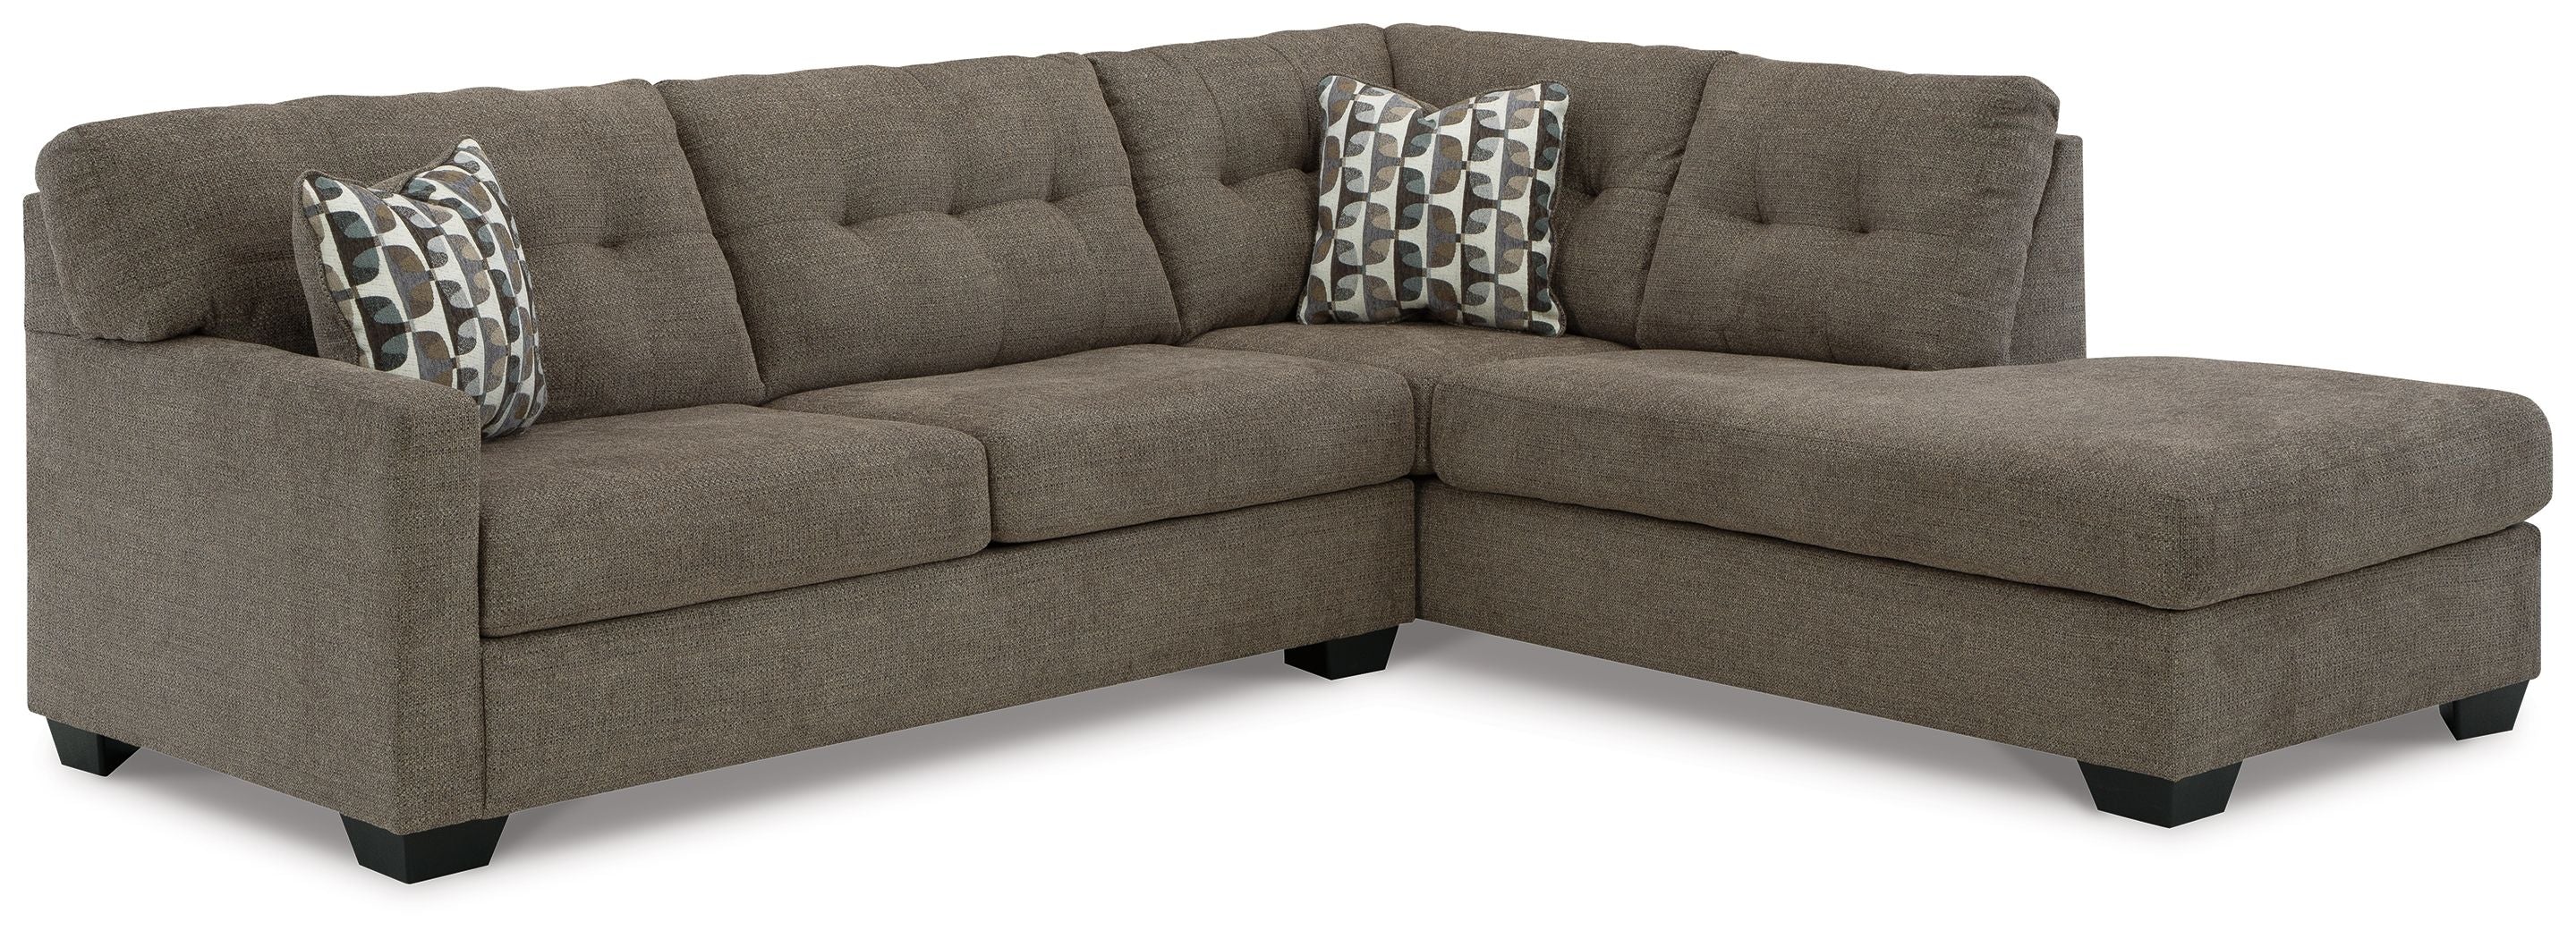 Mahoney 2-Piece L Shaped Sectional Sofa-Stationary Sectionals-American Furniture Outlet